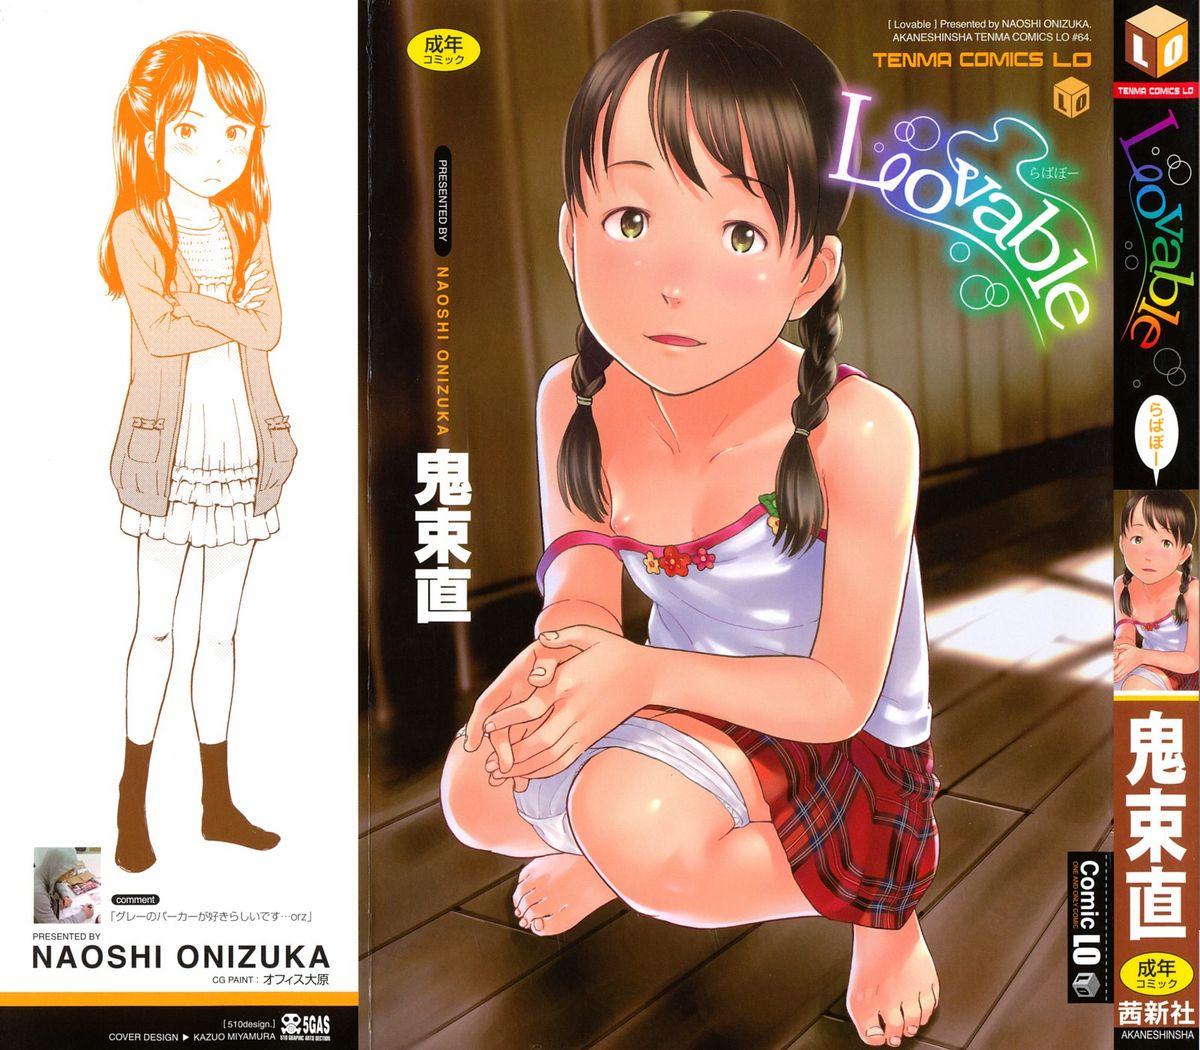 Lovable Ch. 1, 3 0